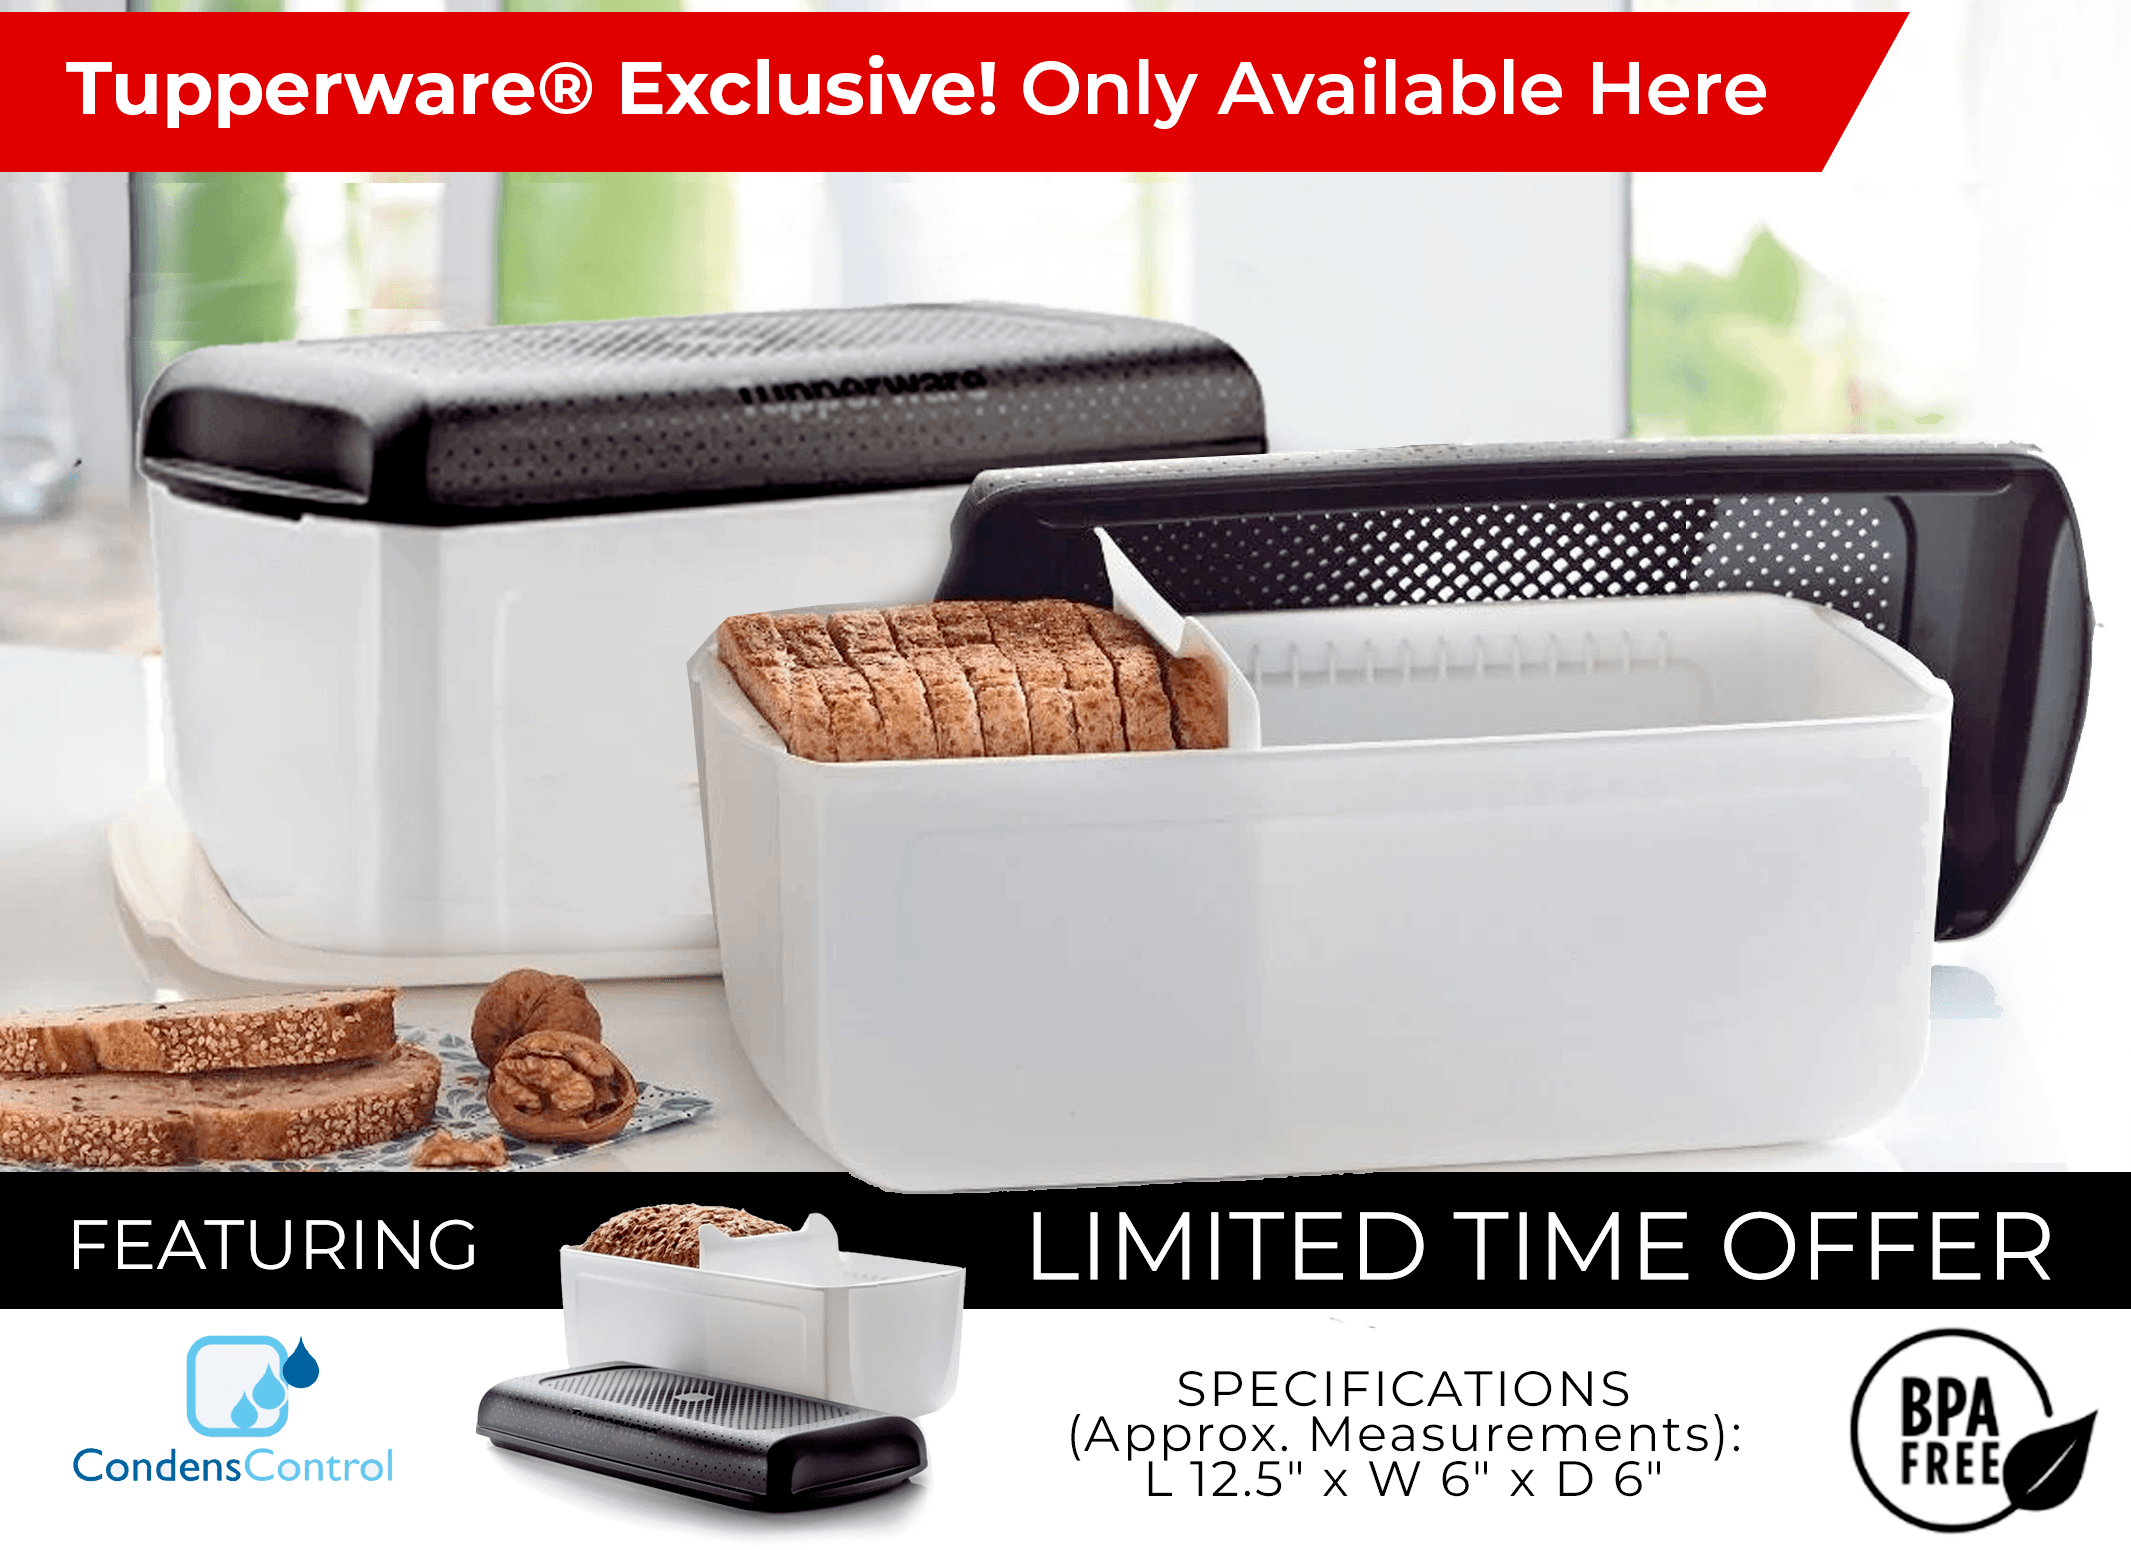 Tupperware Bread Saver- Storage Container & Bread Box for Bread, Pastries,  Bagels & More, CondensControl- Moisture Control Technology, Keeps Bread